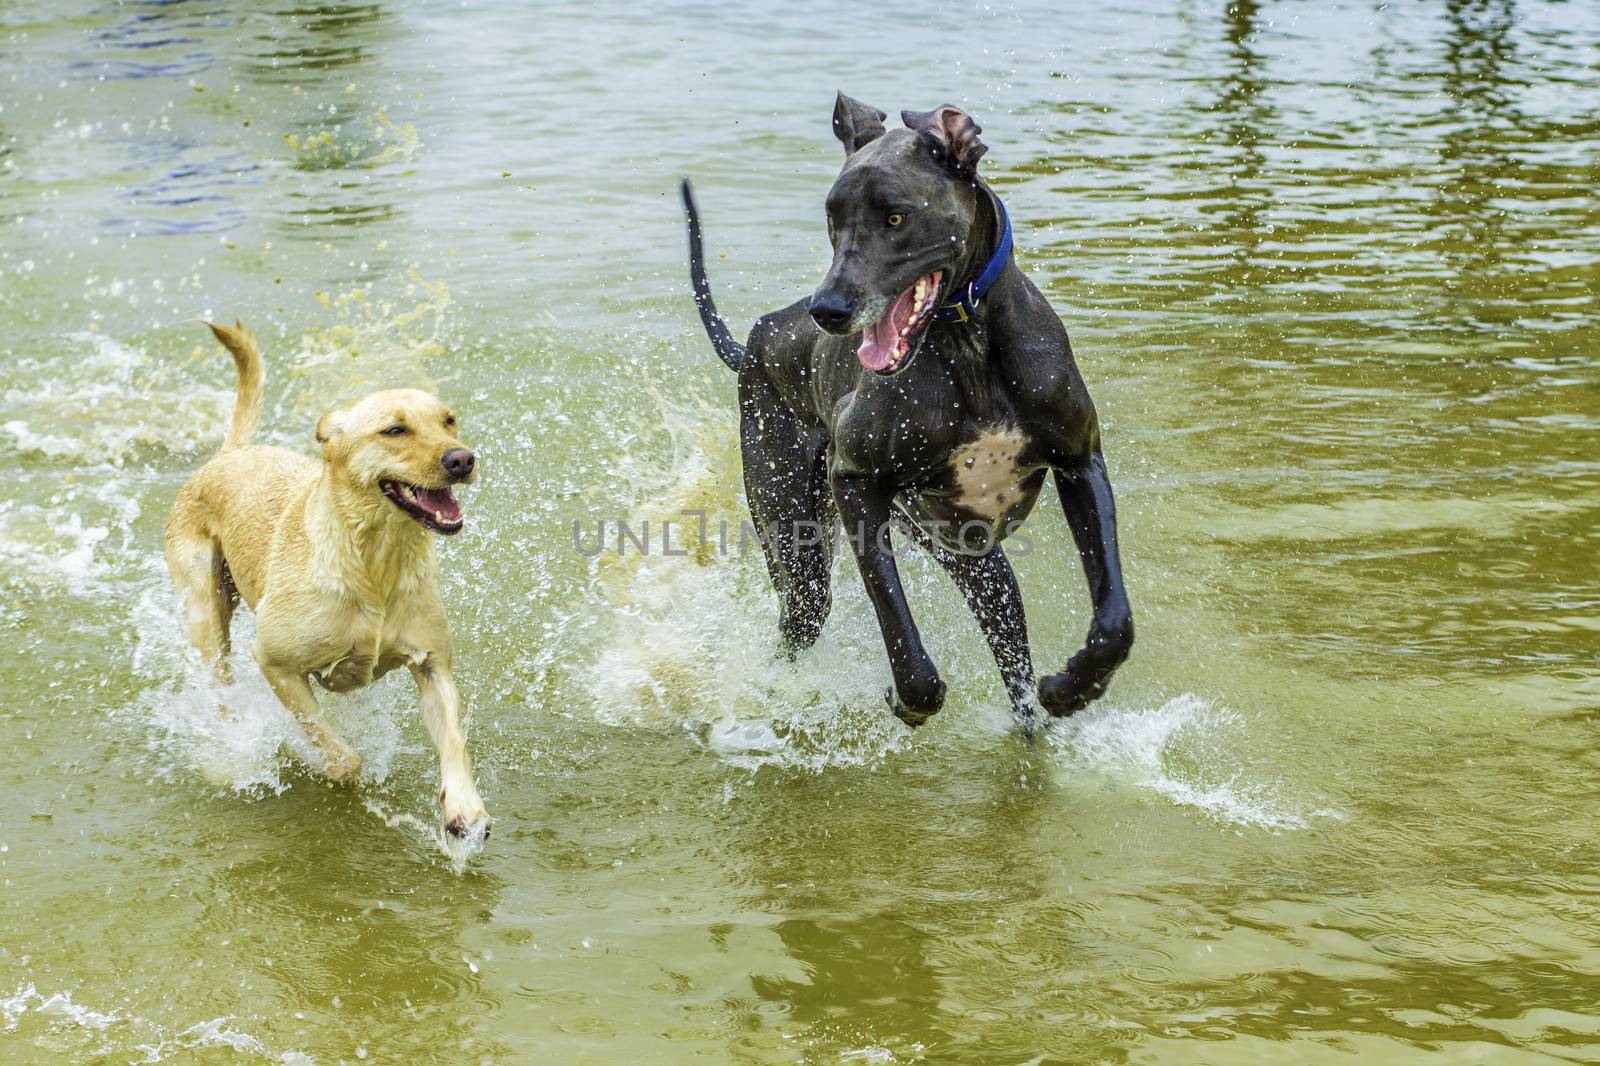 Two dogs running and playing in the lake water.